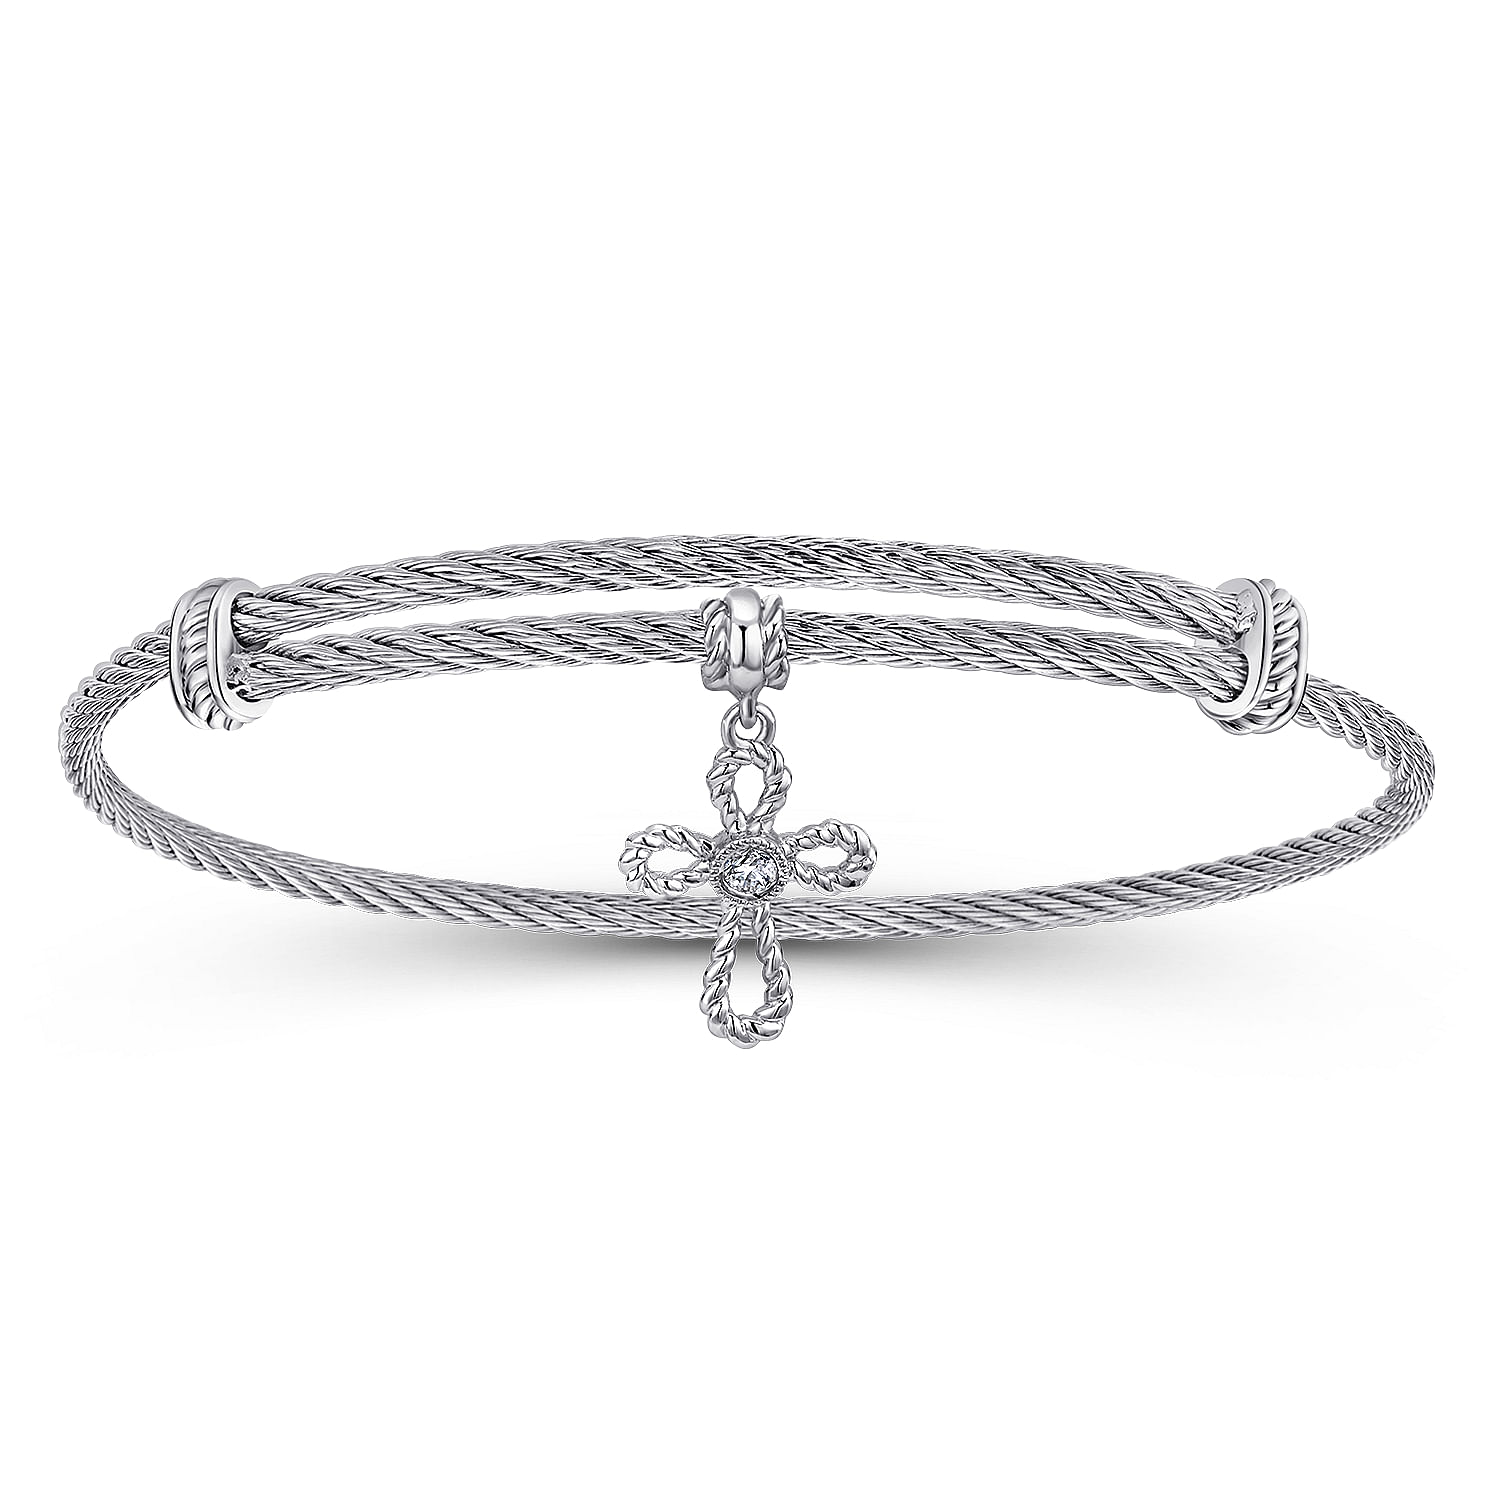 Adjustable Twisted Cable Stainless Steel Bangle with Sterling Silver and White Sapphire Cross Charm